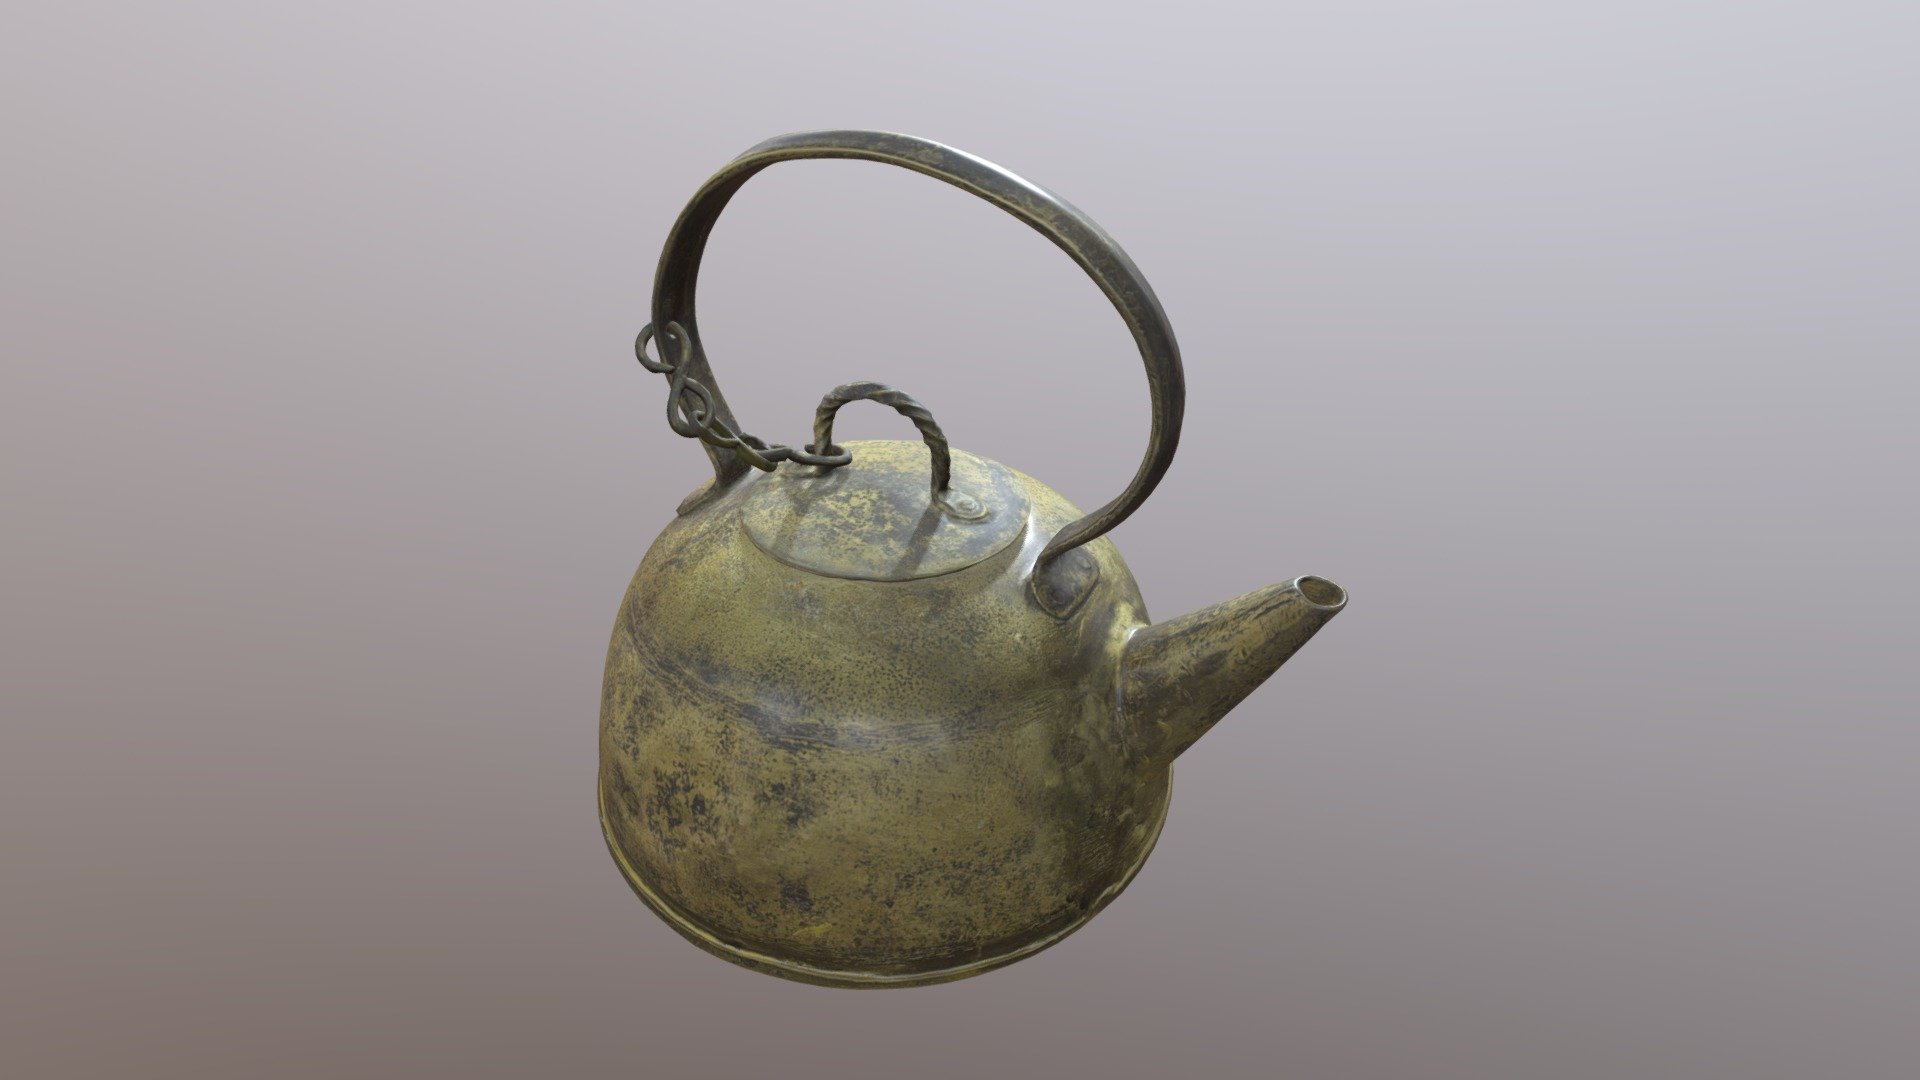 This is a old fashion teapot. 
Scanned with one camera. Inside also scanned and texured 3d model